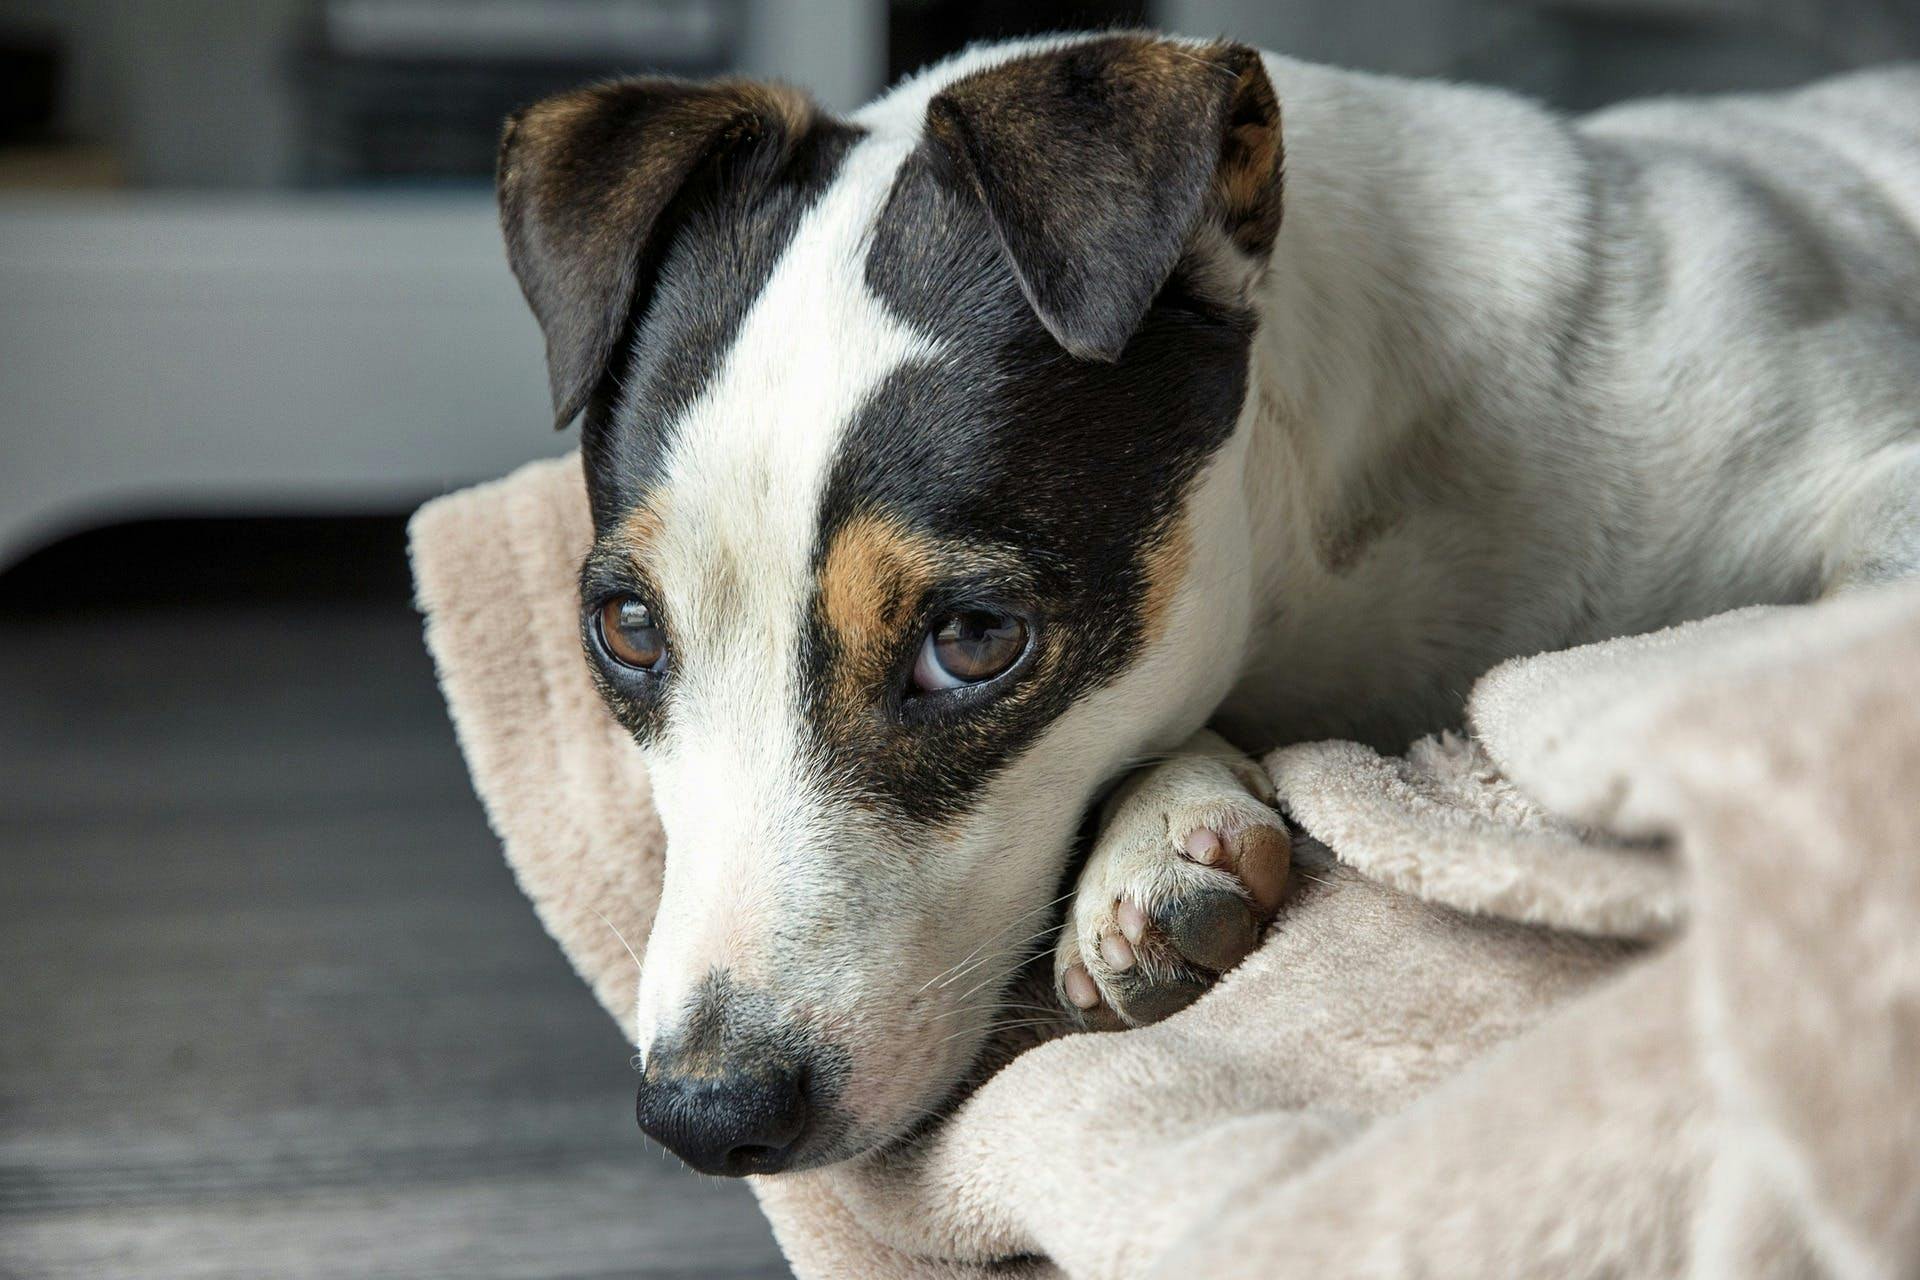 adorable Jack Russell snuggled in dog bed